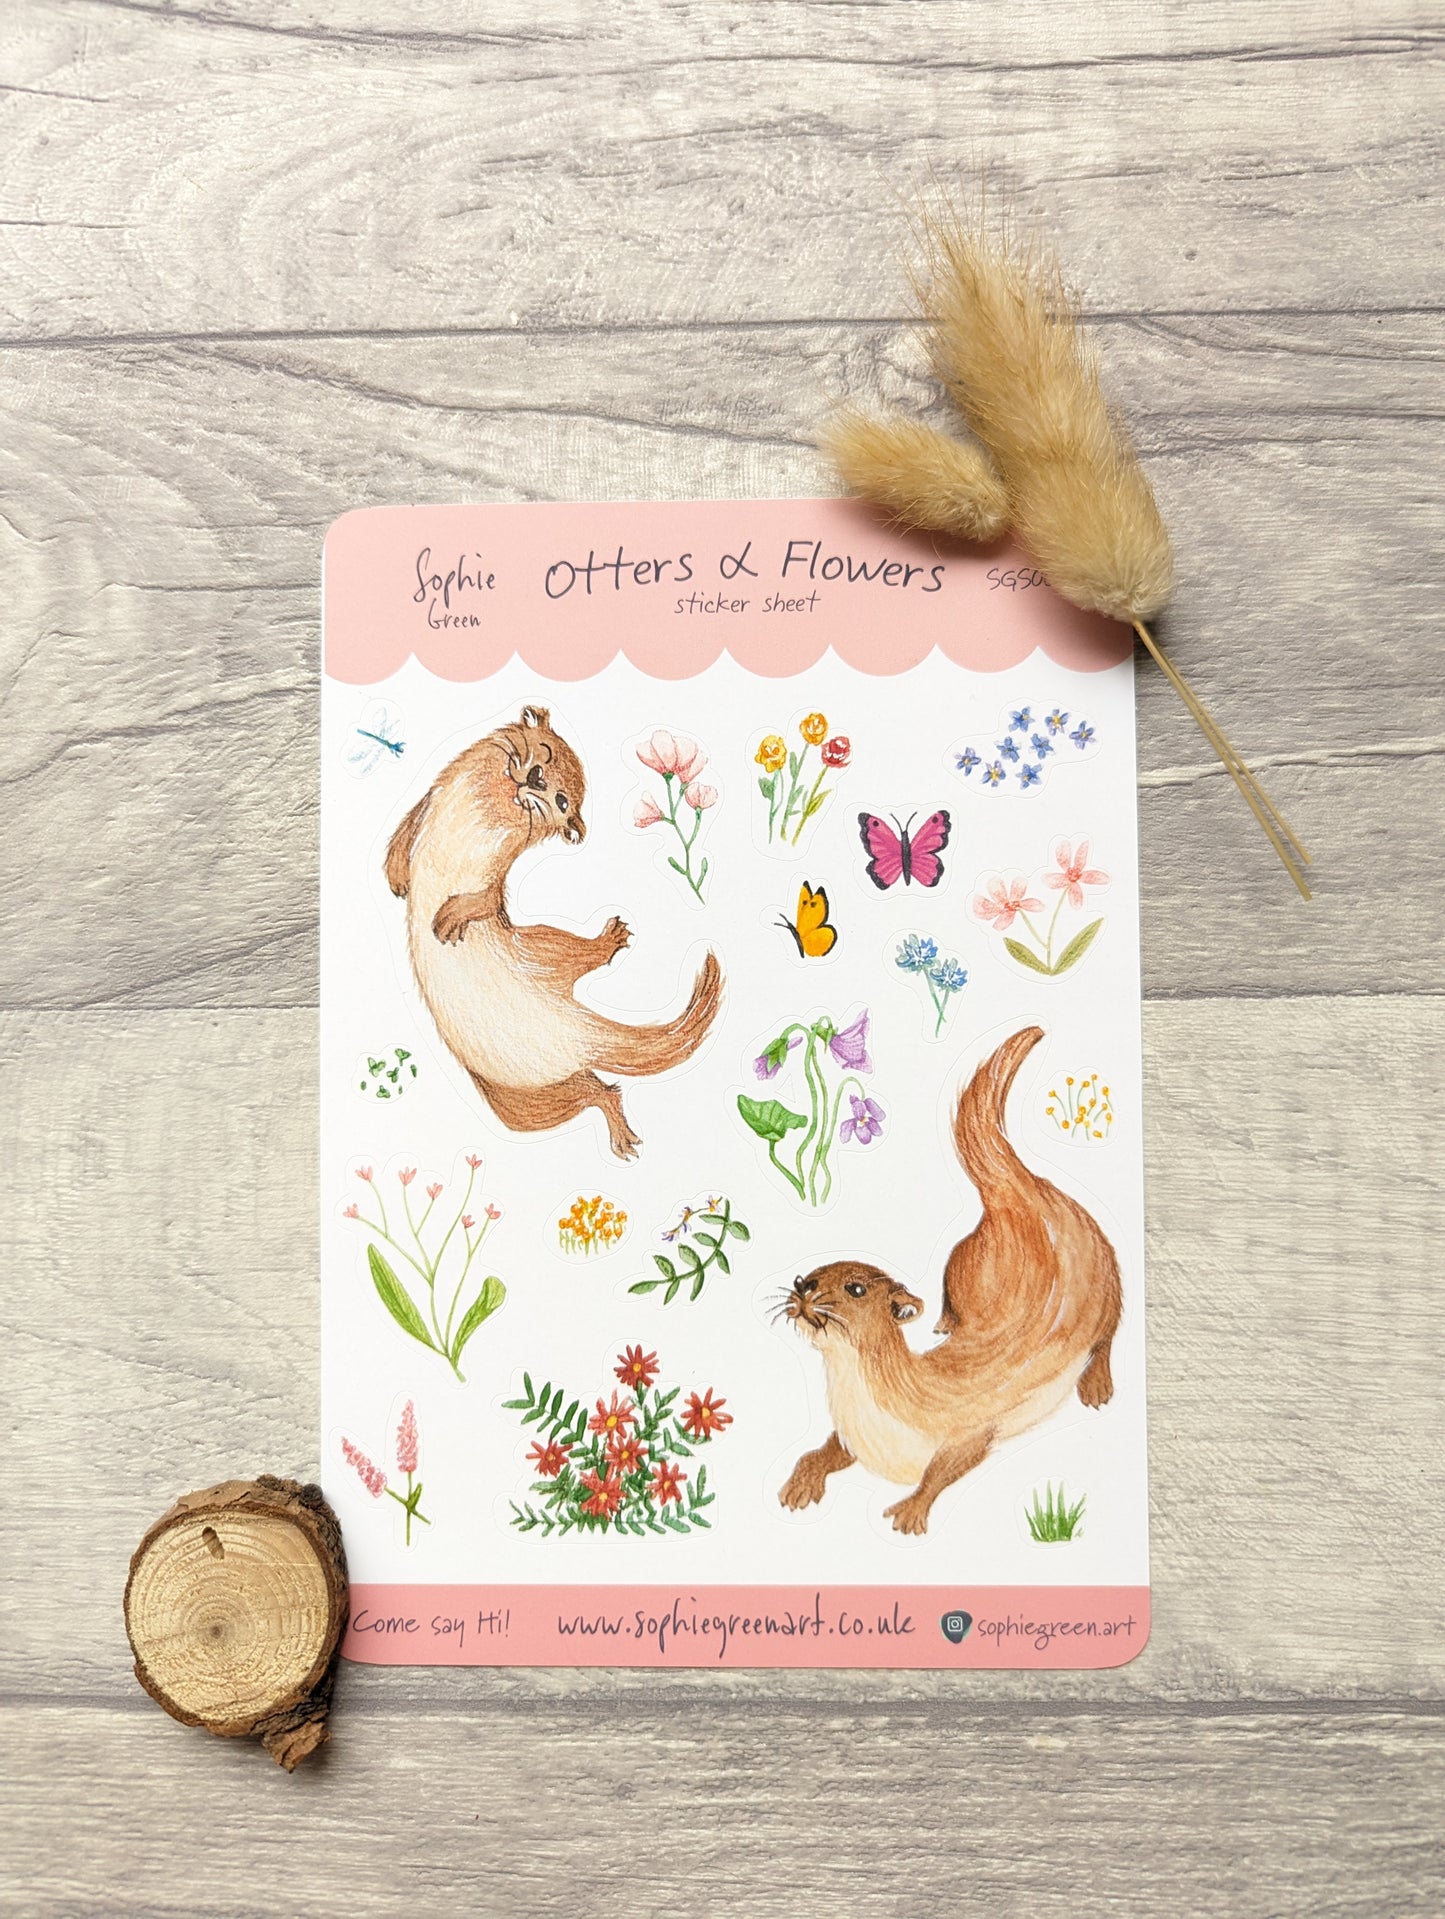 Otters and Flowers - Sticker Sheet